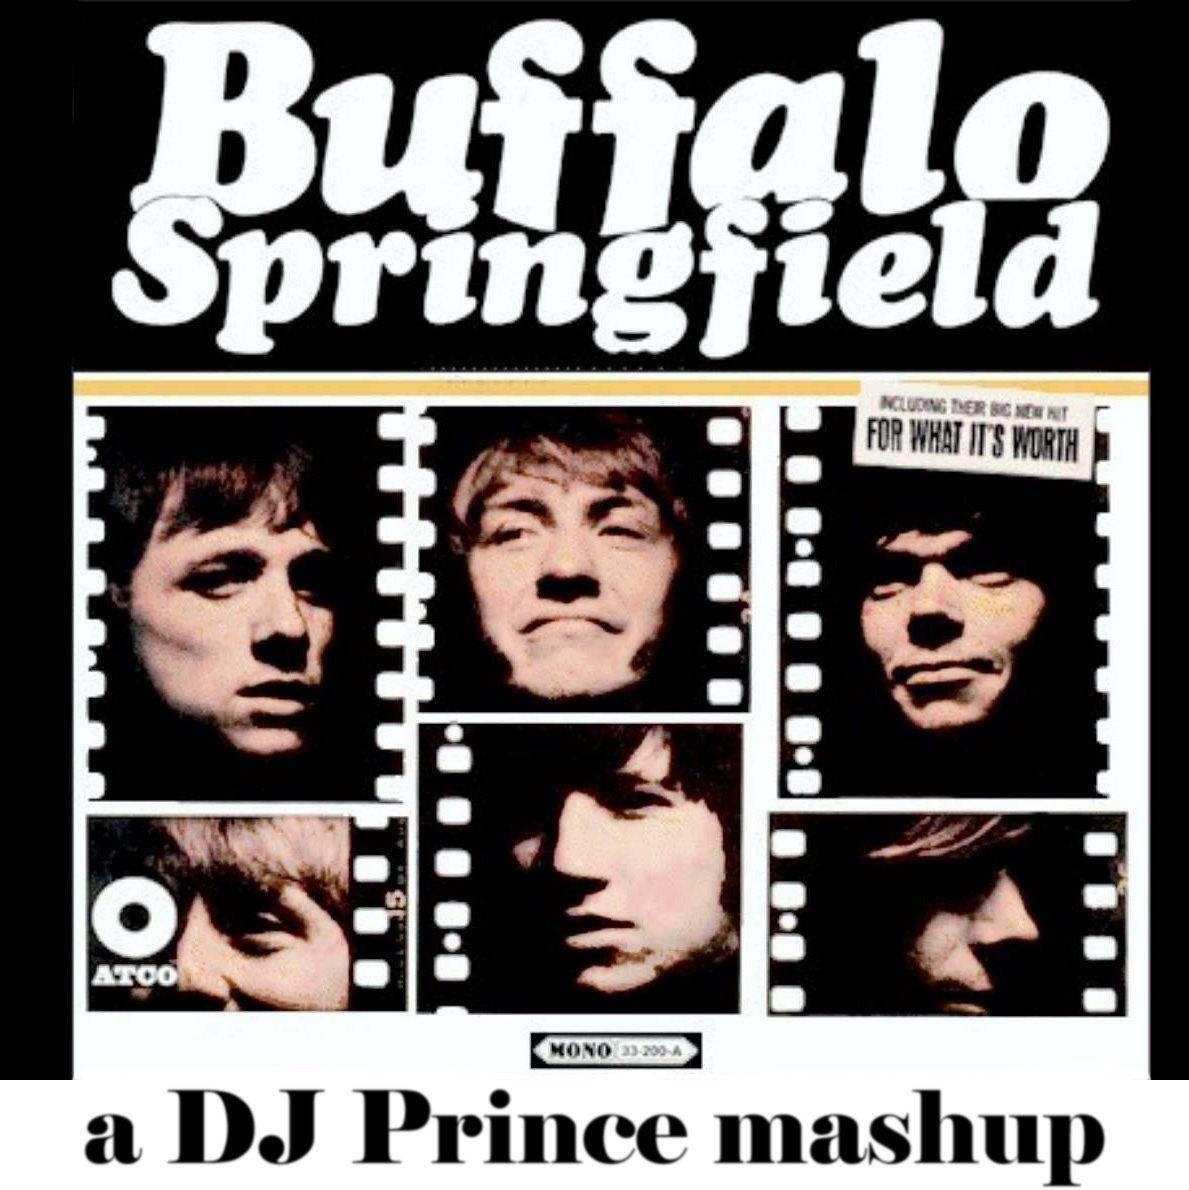 The Honey Drippers vs Buffalo Springfield - For whats its worth impeach the president (DJ Prince mashup)